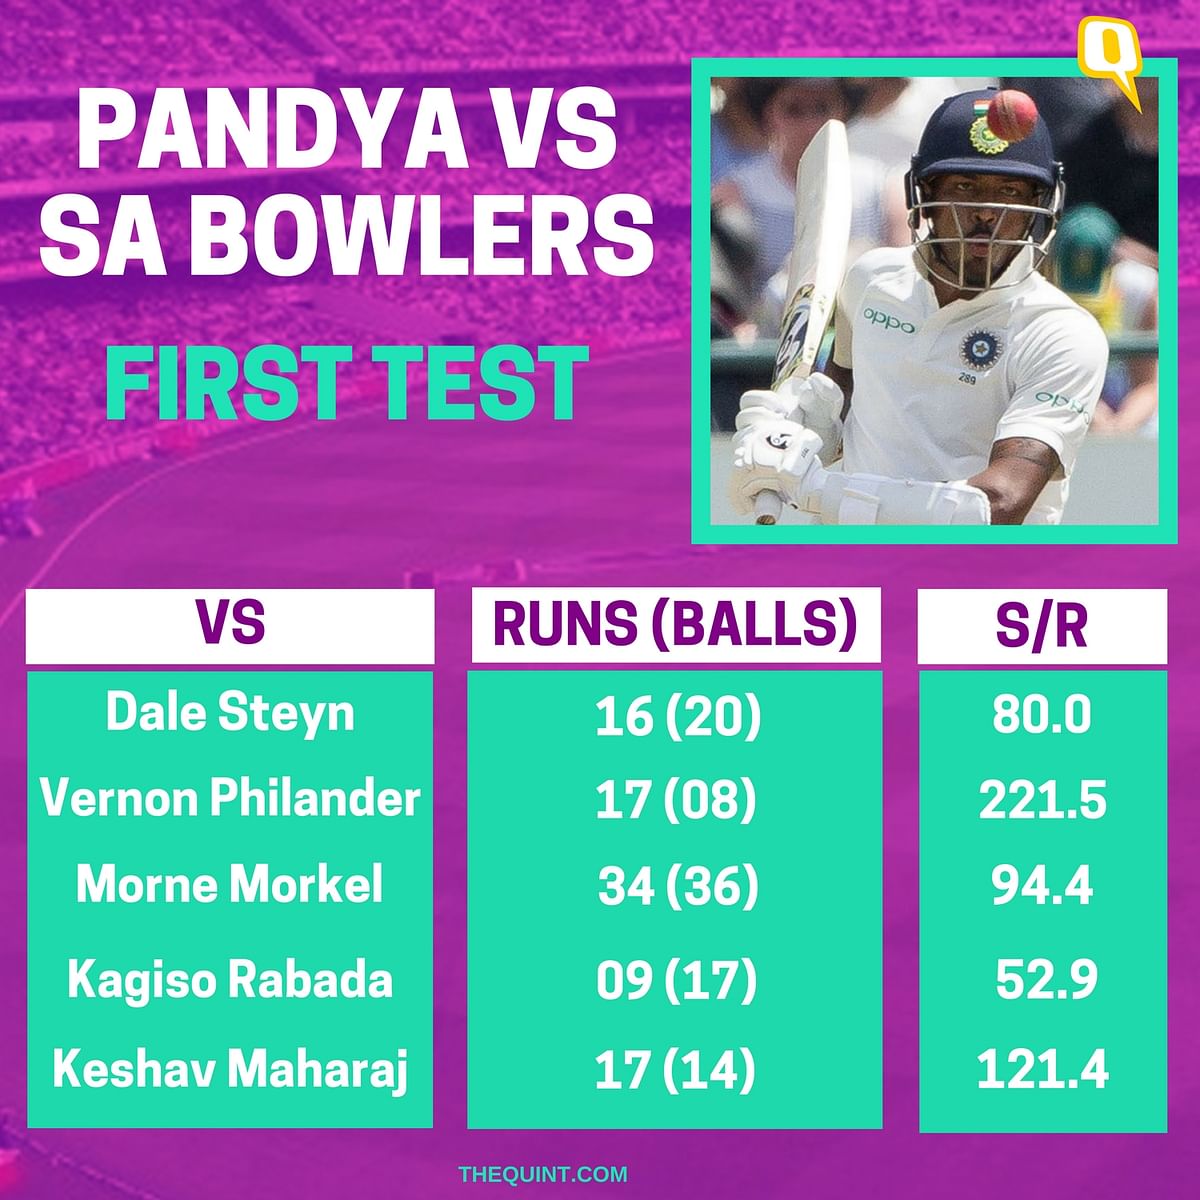 South Africa end Day 2 of the first Test against India at 65/2.